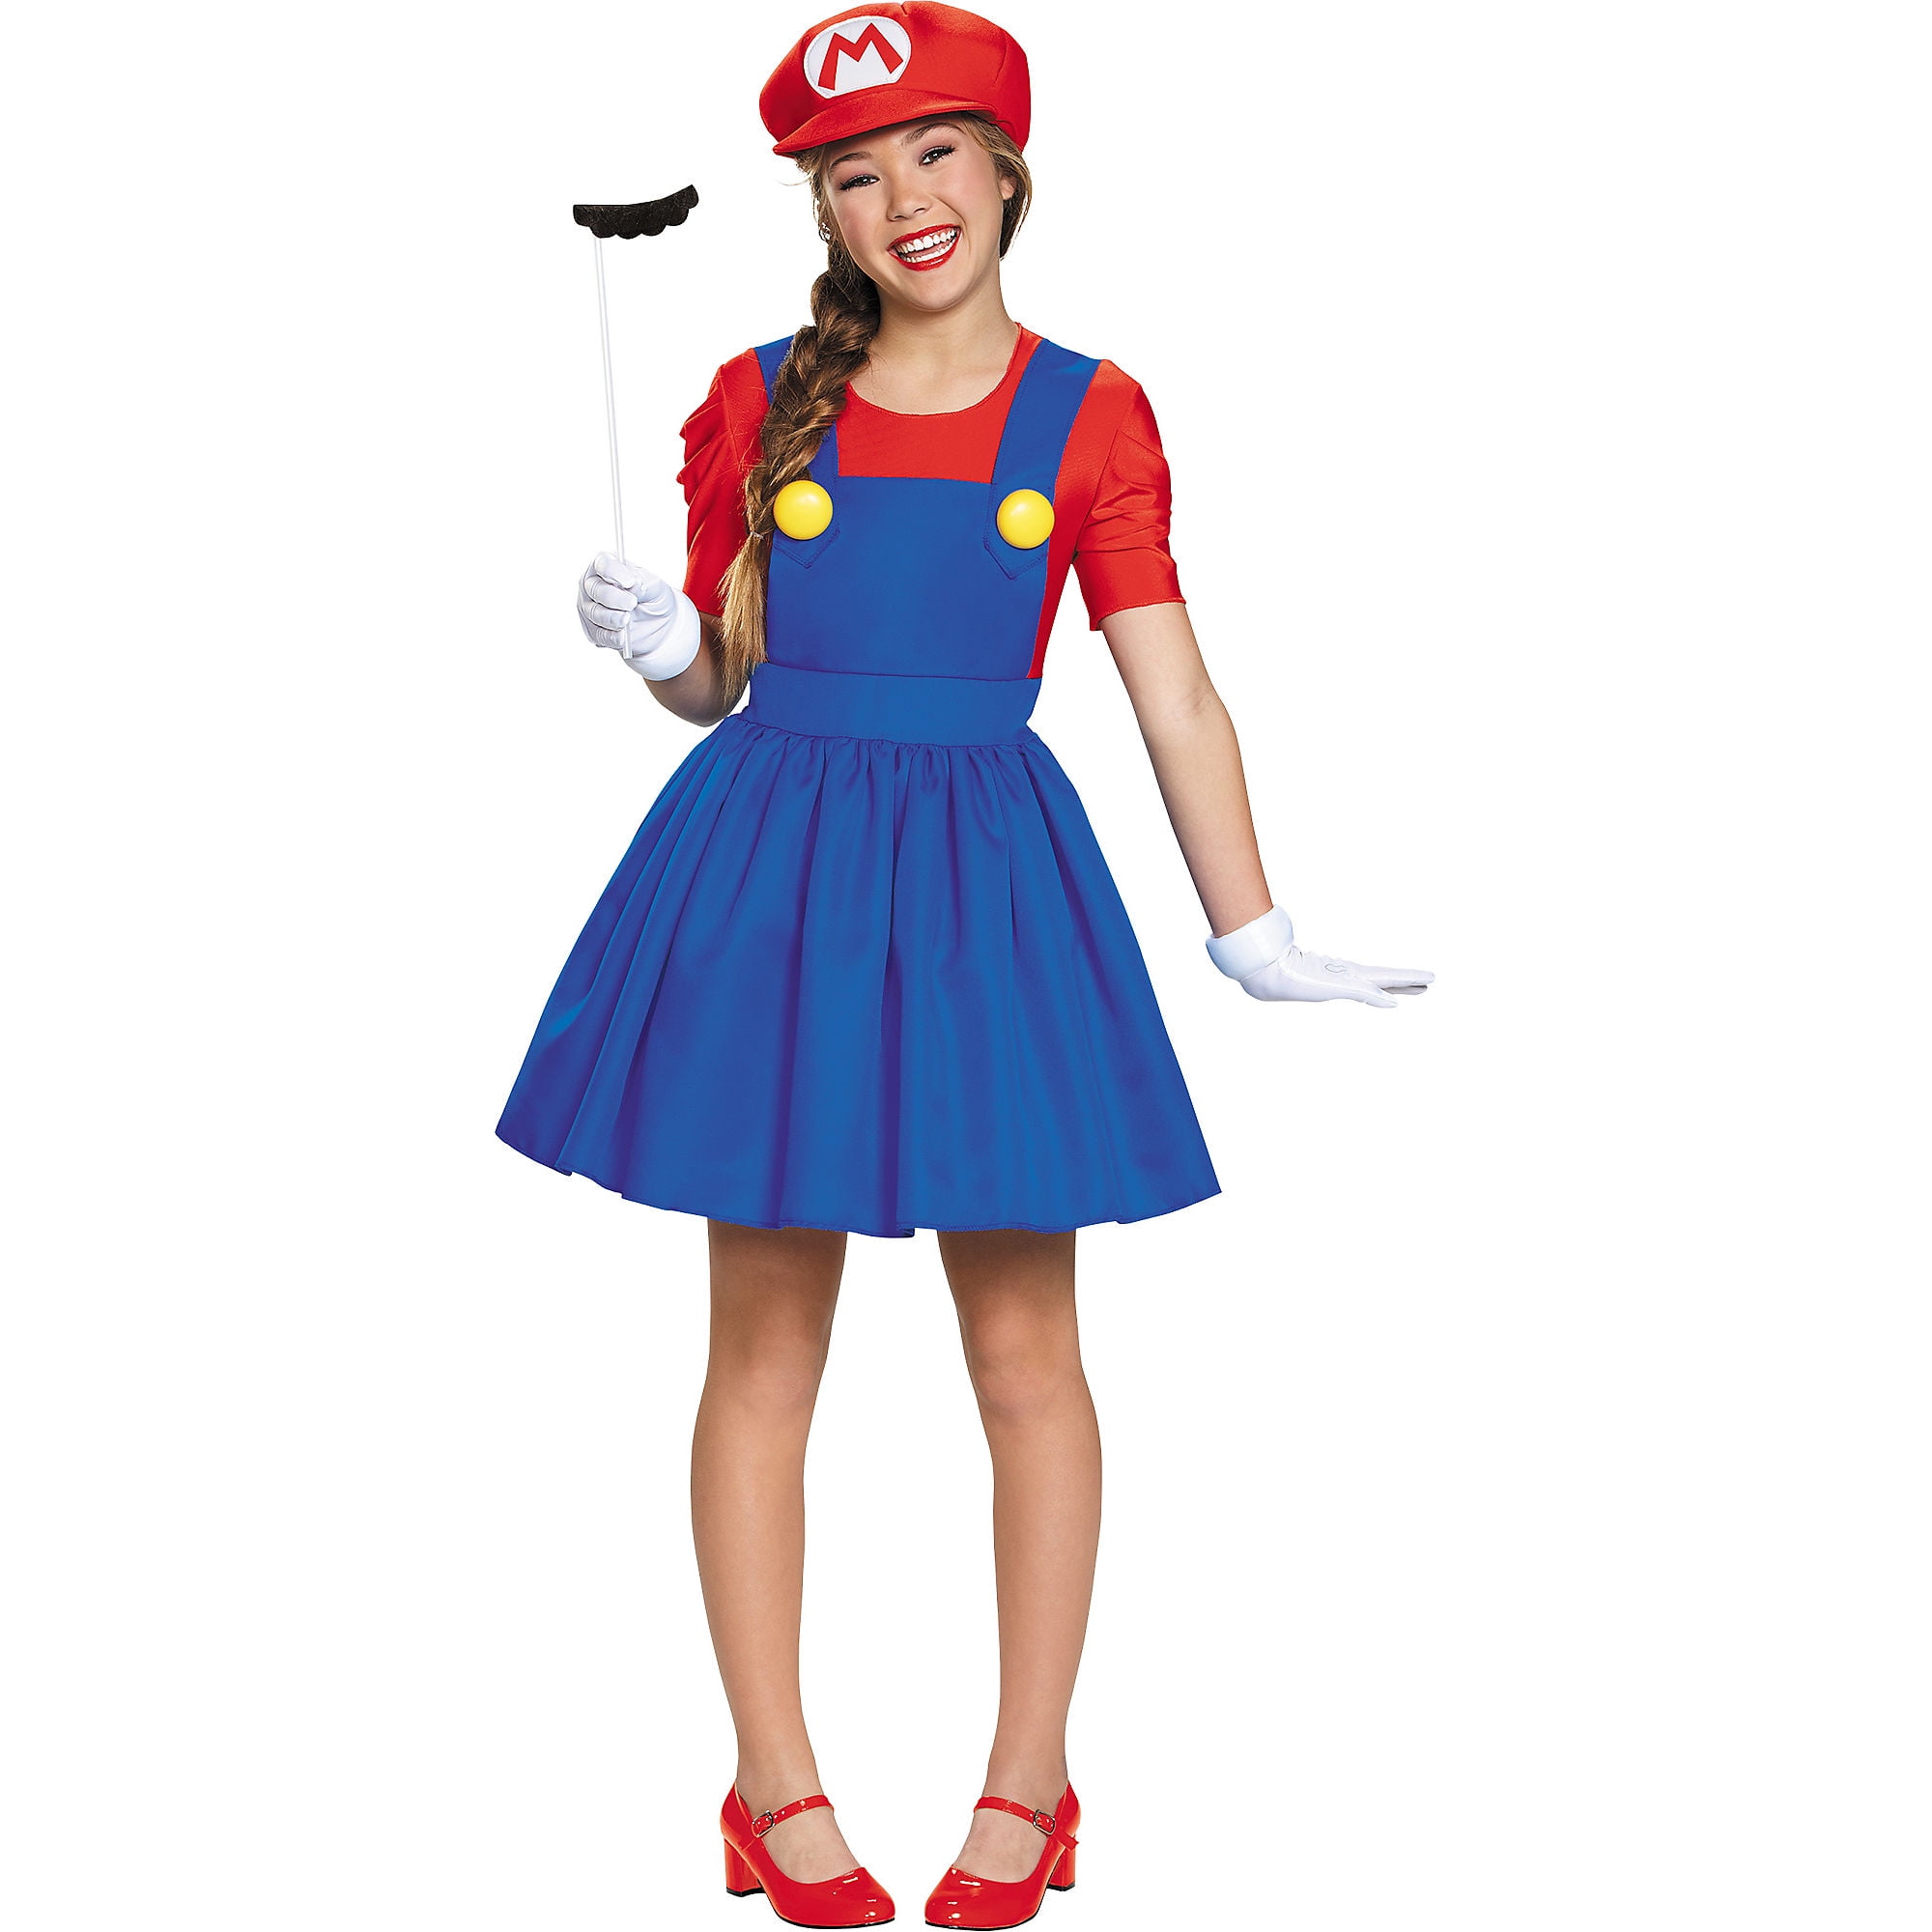 Miss Mario Costume for Girls, Super Mario Brothers, XL, with Accessories - Walmart.com